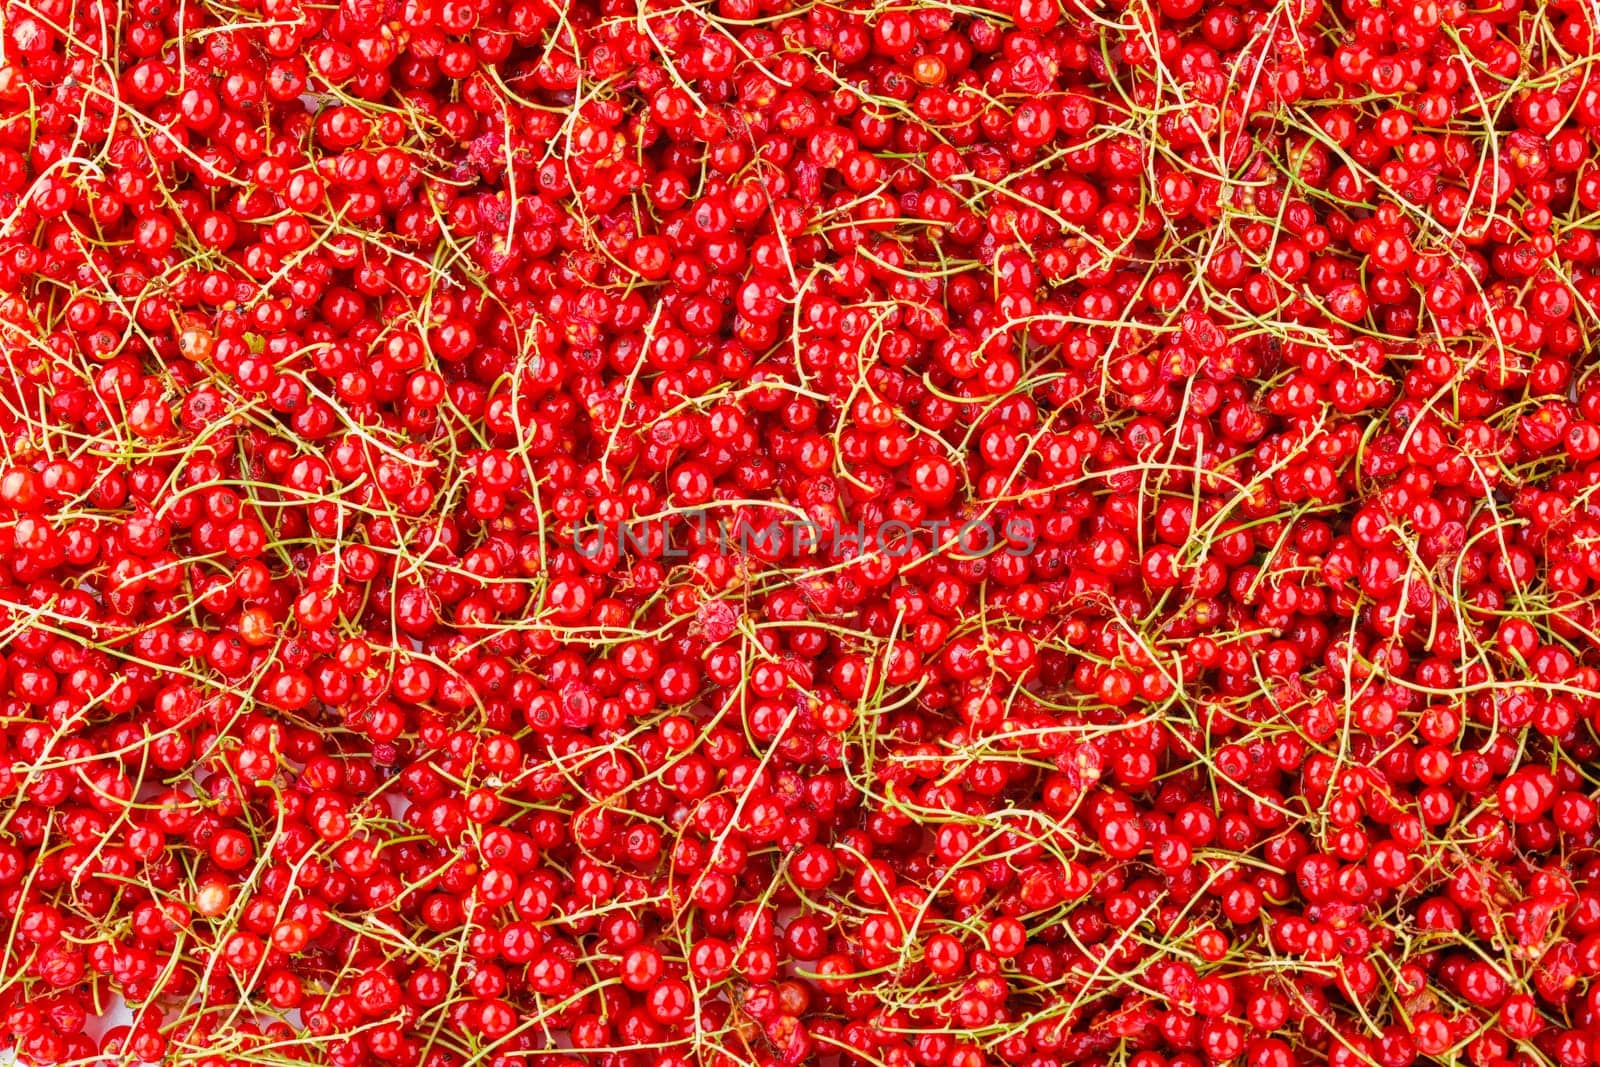 full-frame background and texture of red currants pile in high angle view by z1b